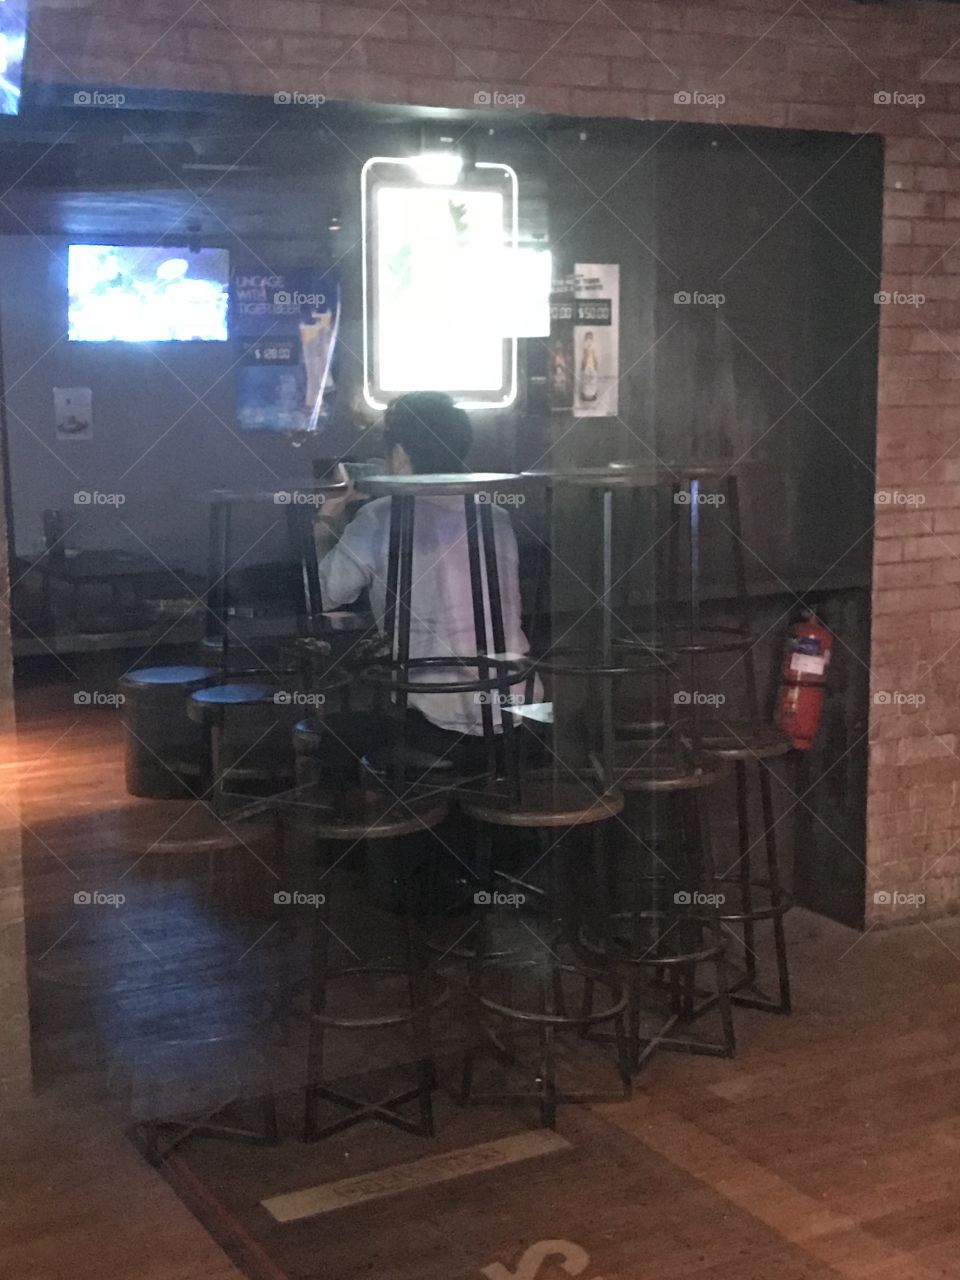 Focus gamer... too focus until his friends build a castle of bar stools around him without him noticing the whole process and still engross with his game